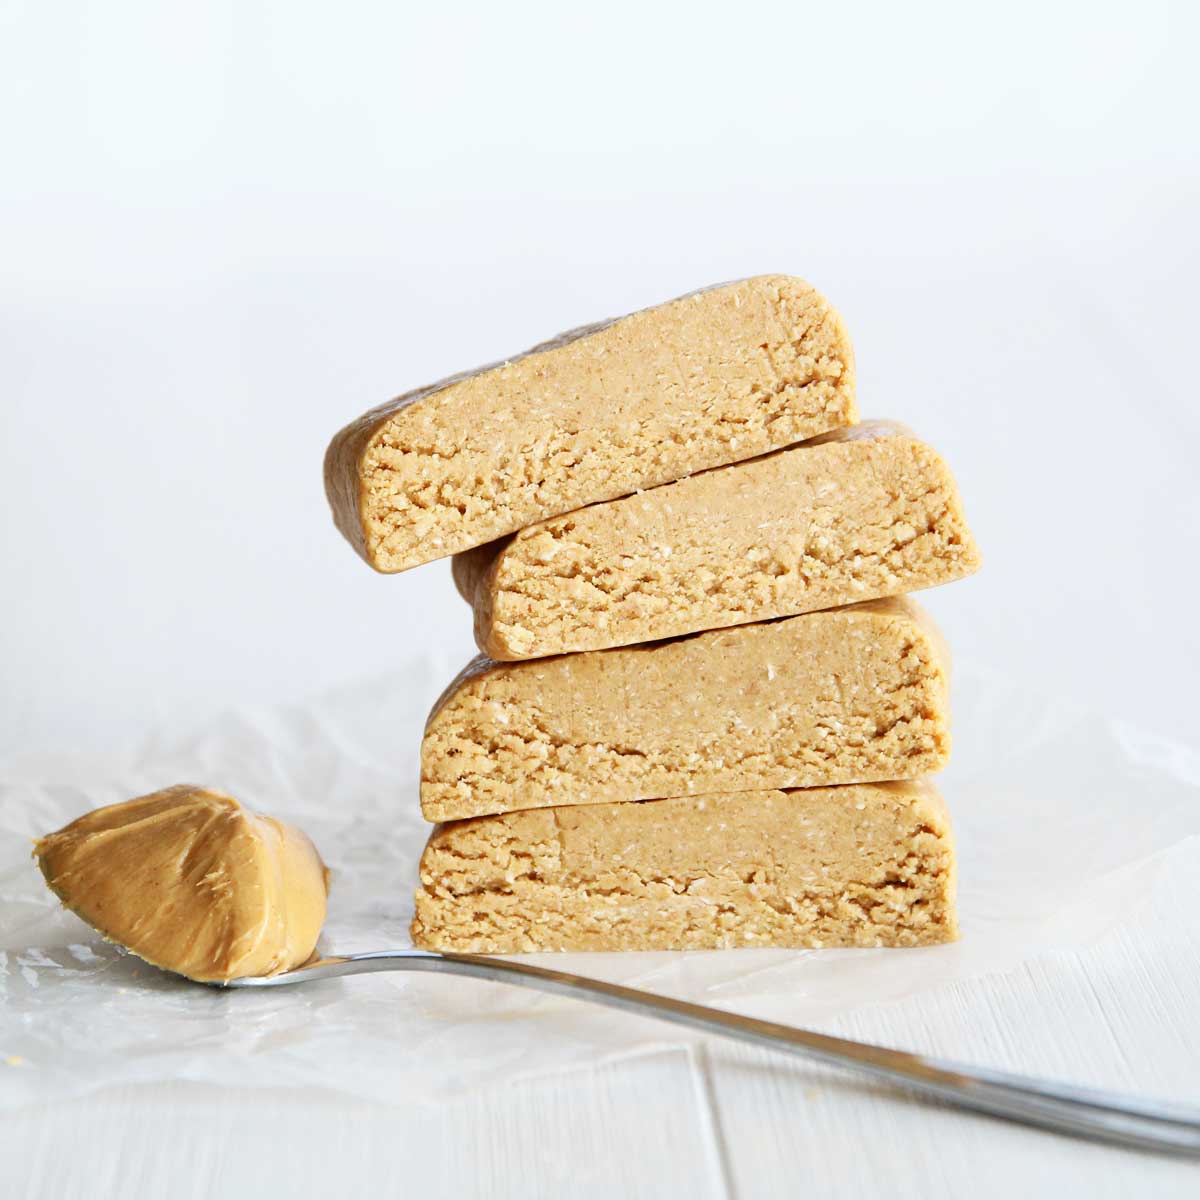 4-Ingredient Peanut Butter Oatmeal Protein Bars (Healthy, GF and Vegan) - naan pizza